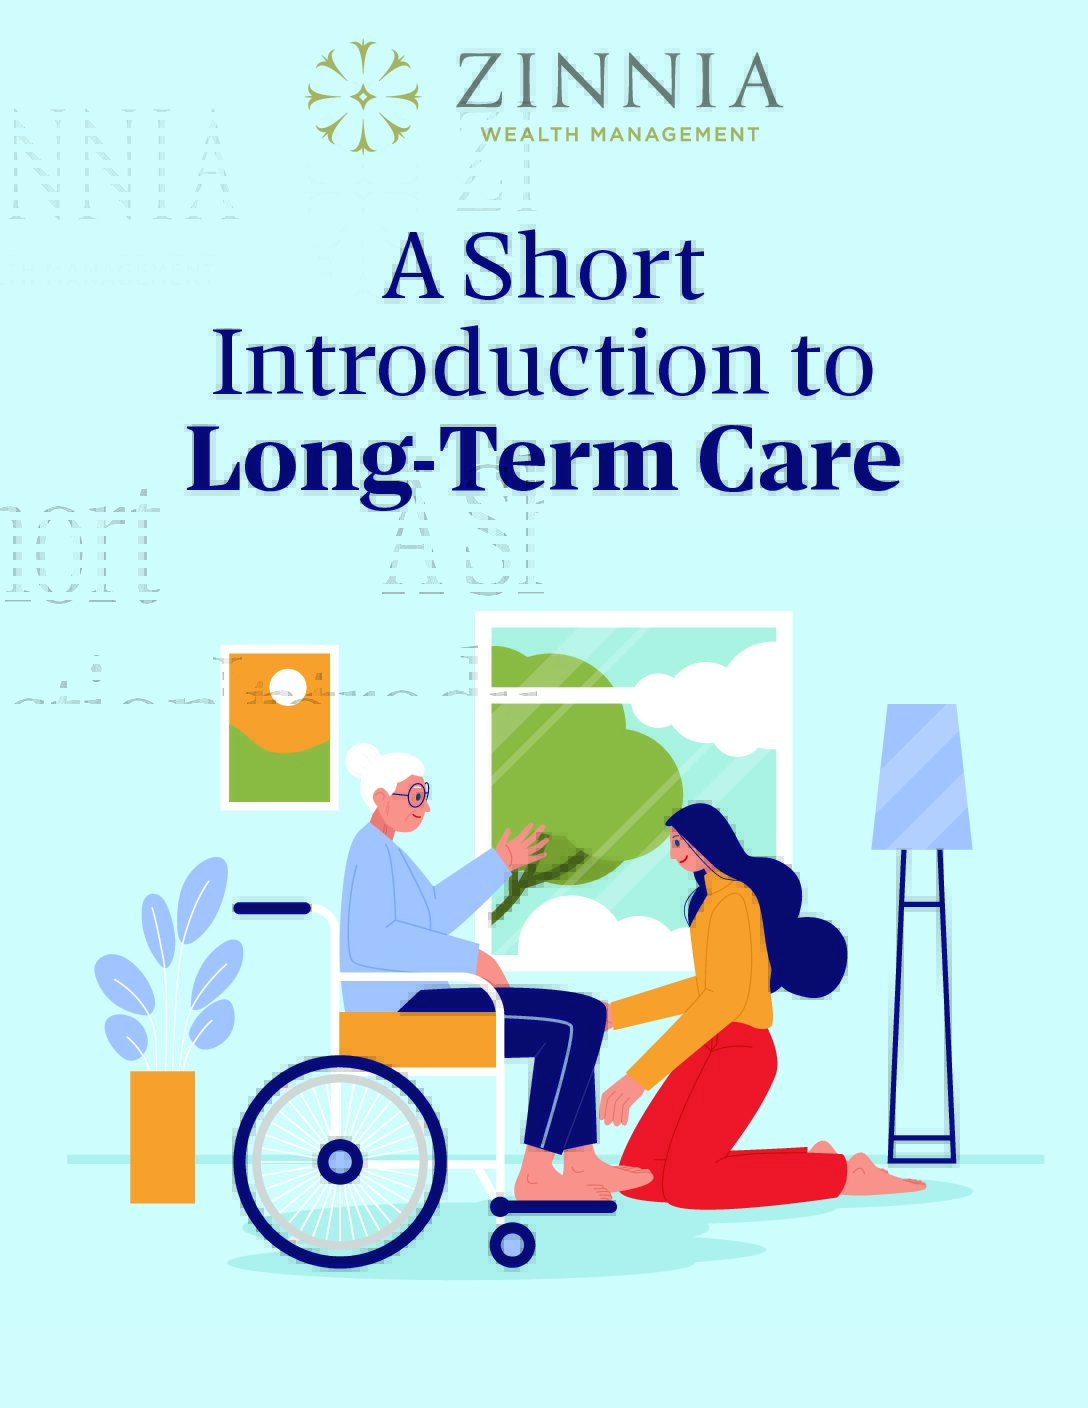 Long-Term Care Guide